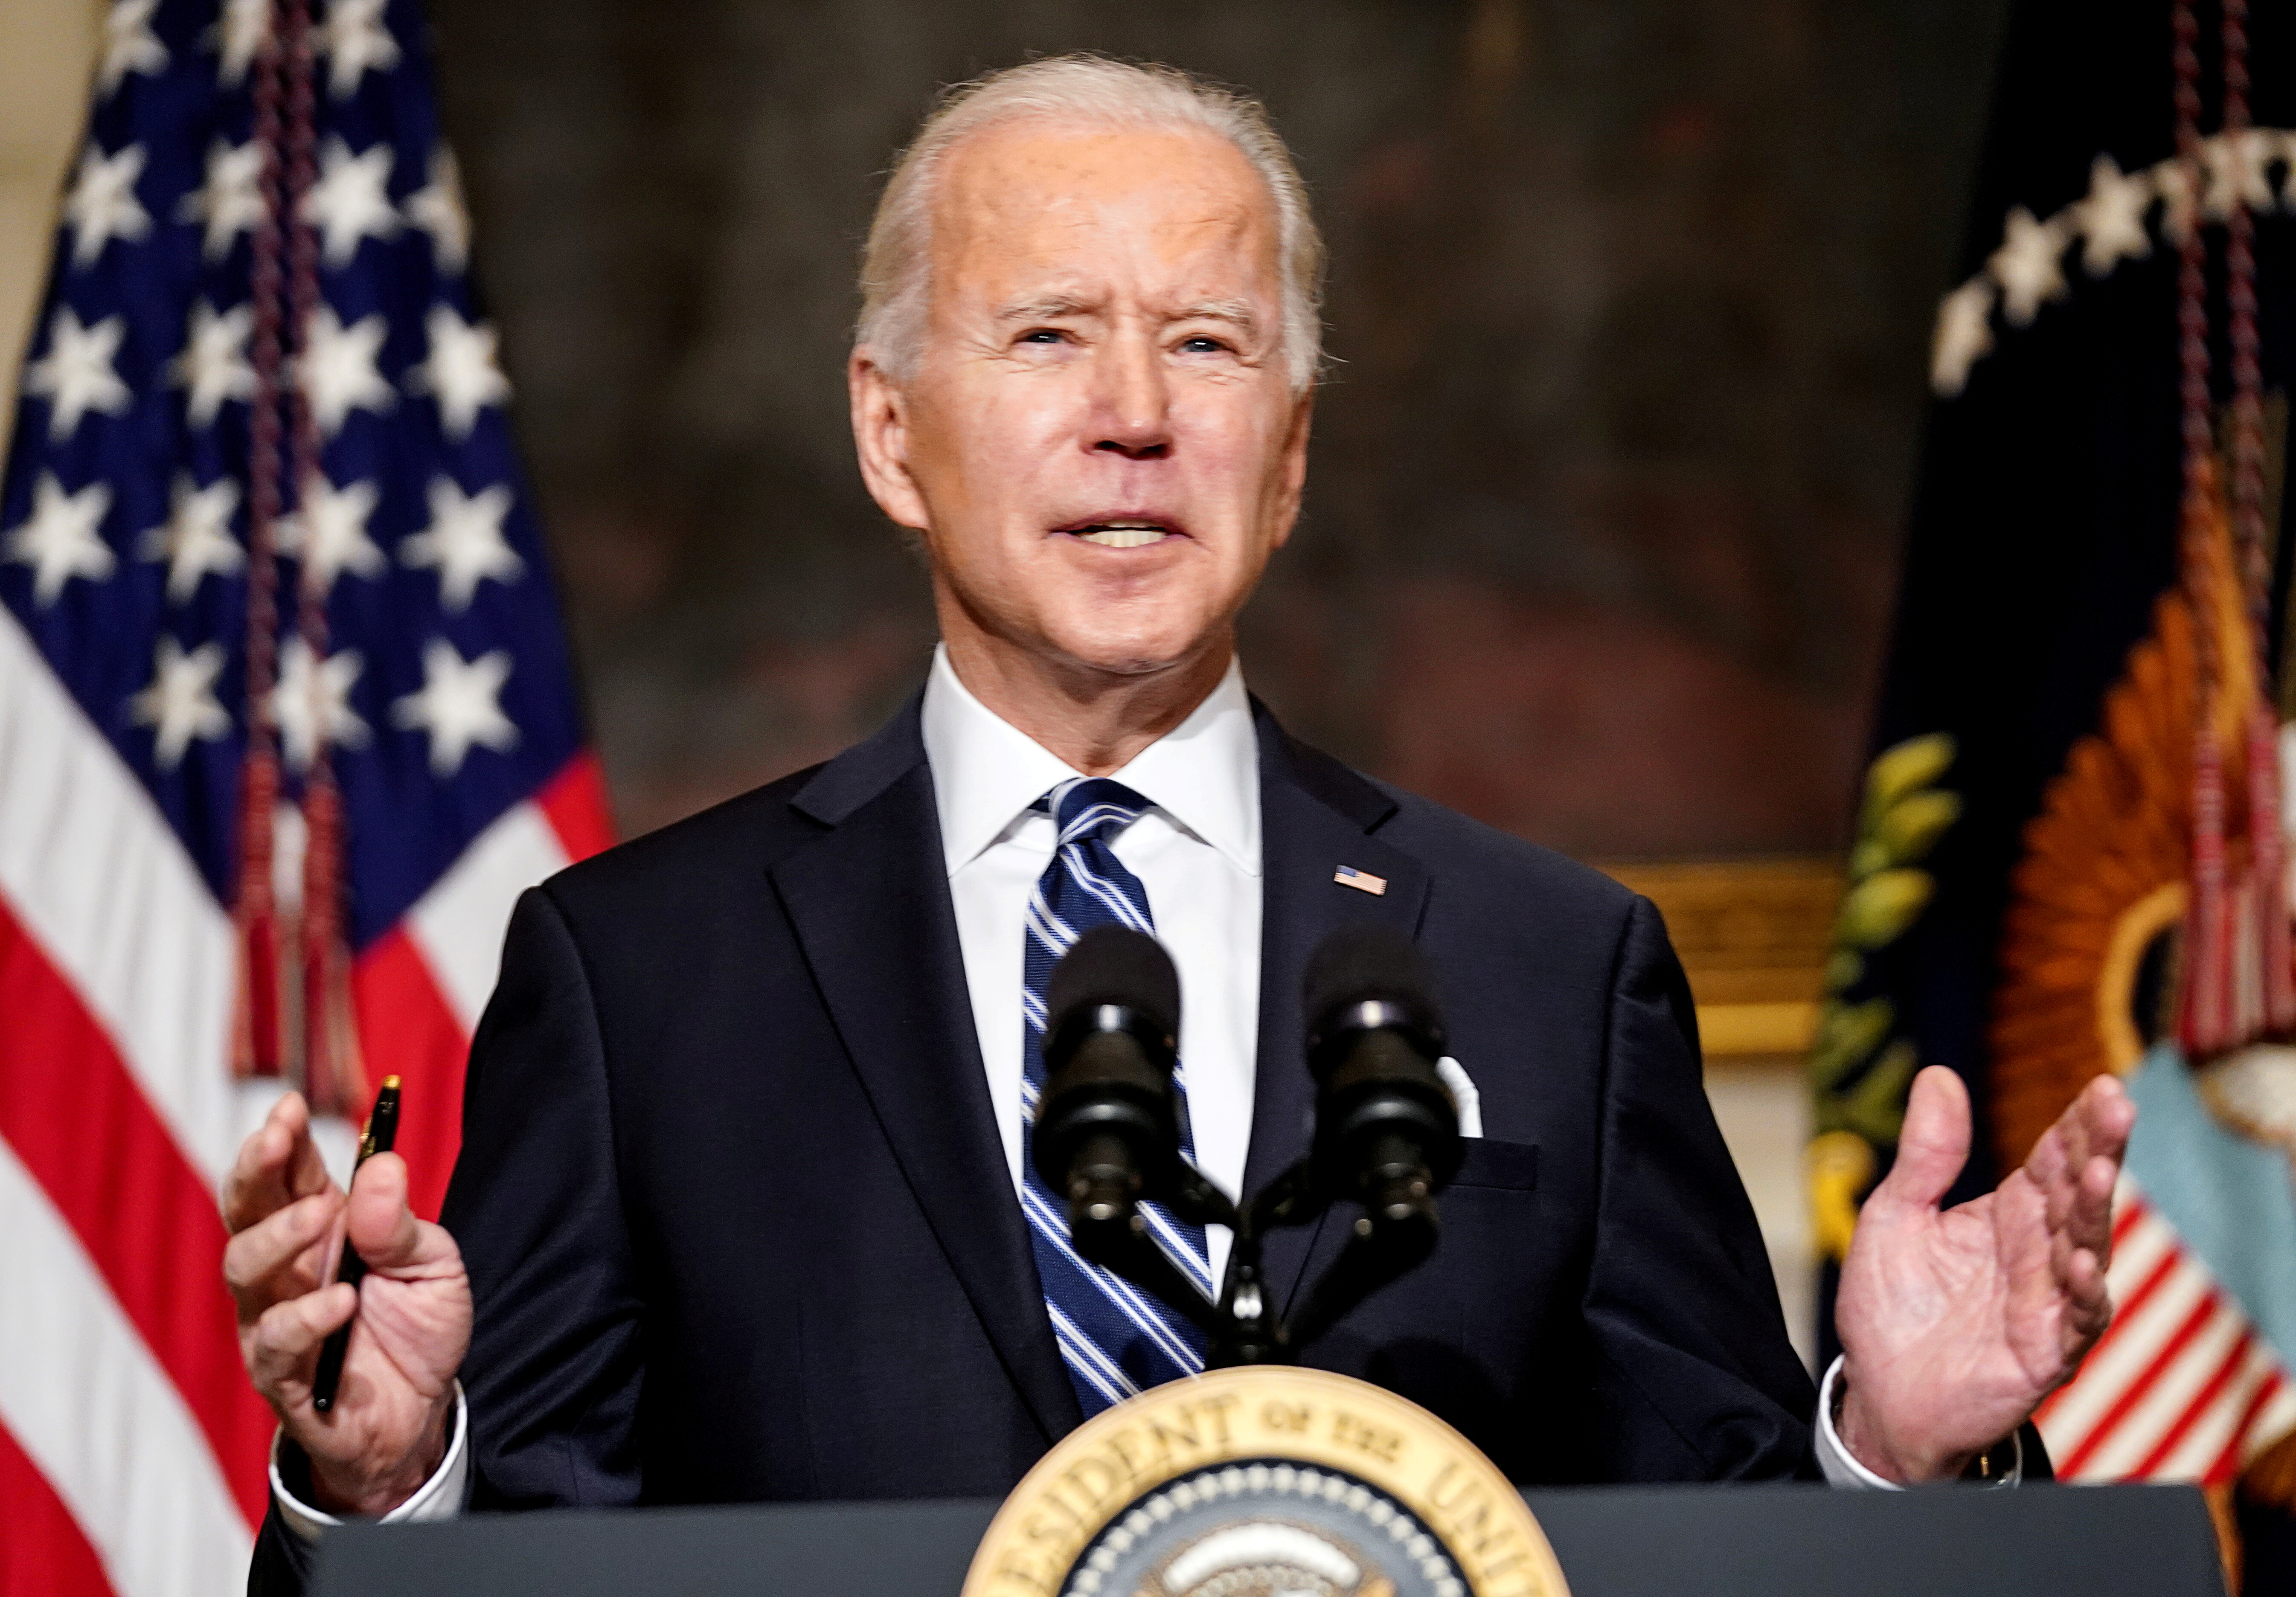 U.S. President Joe Biden delivers remarks on tackling climate change prior to signing executive actions in the State Dining Room at the White House in Washington, U.S., January 27, 2021. REUTERS/Kevin Lamarque/File Photo